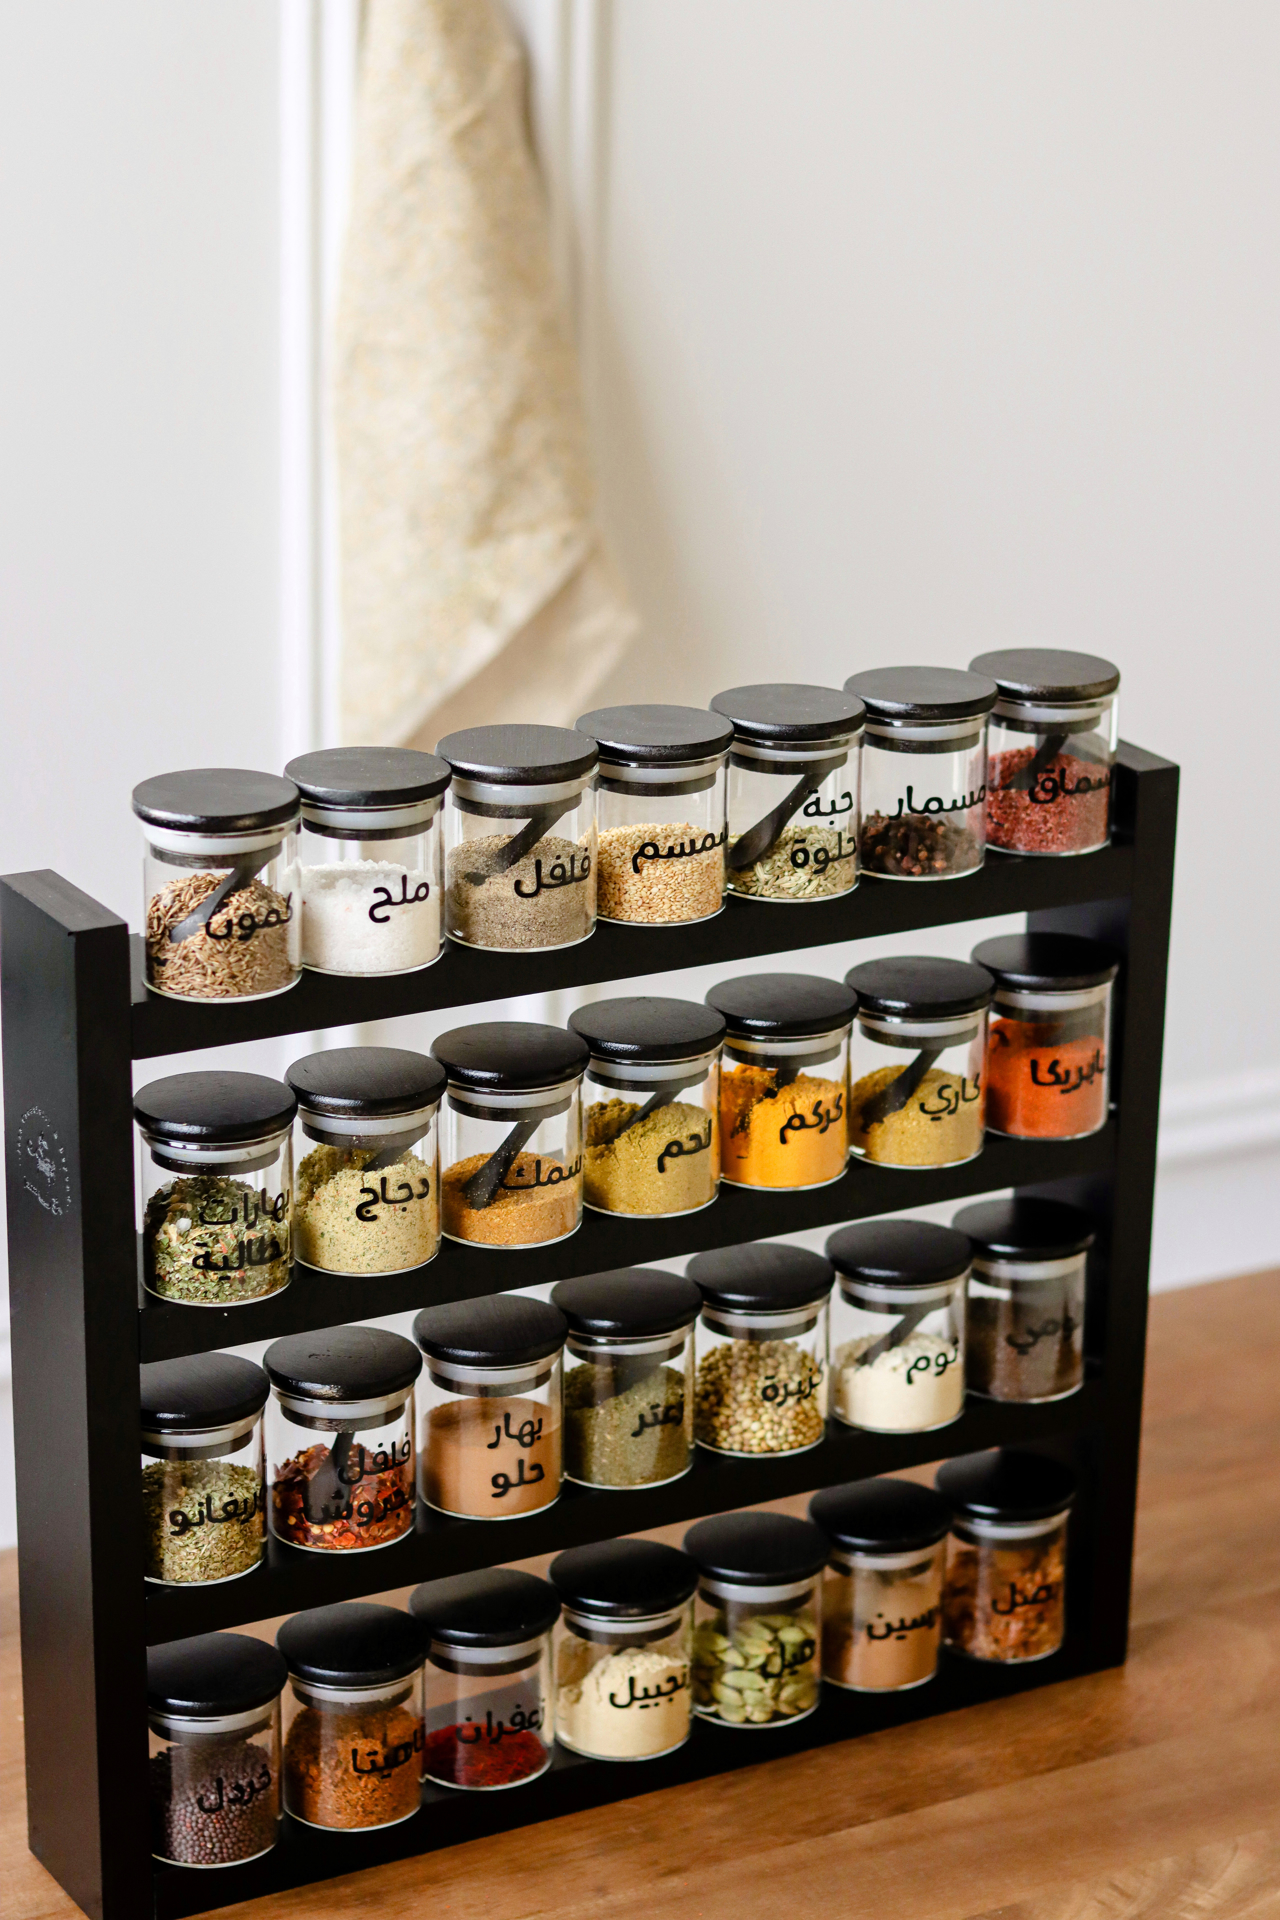 Picture of Four Tier Spice Rack With 28 Jars 100 ml - Black Set